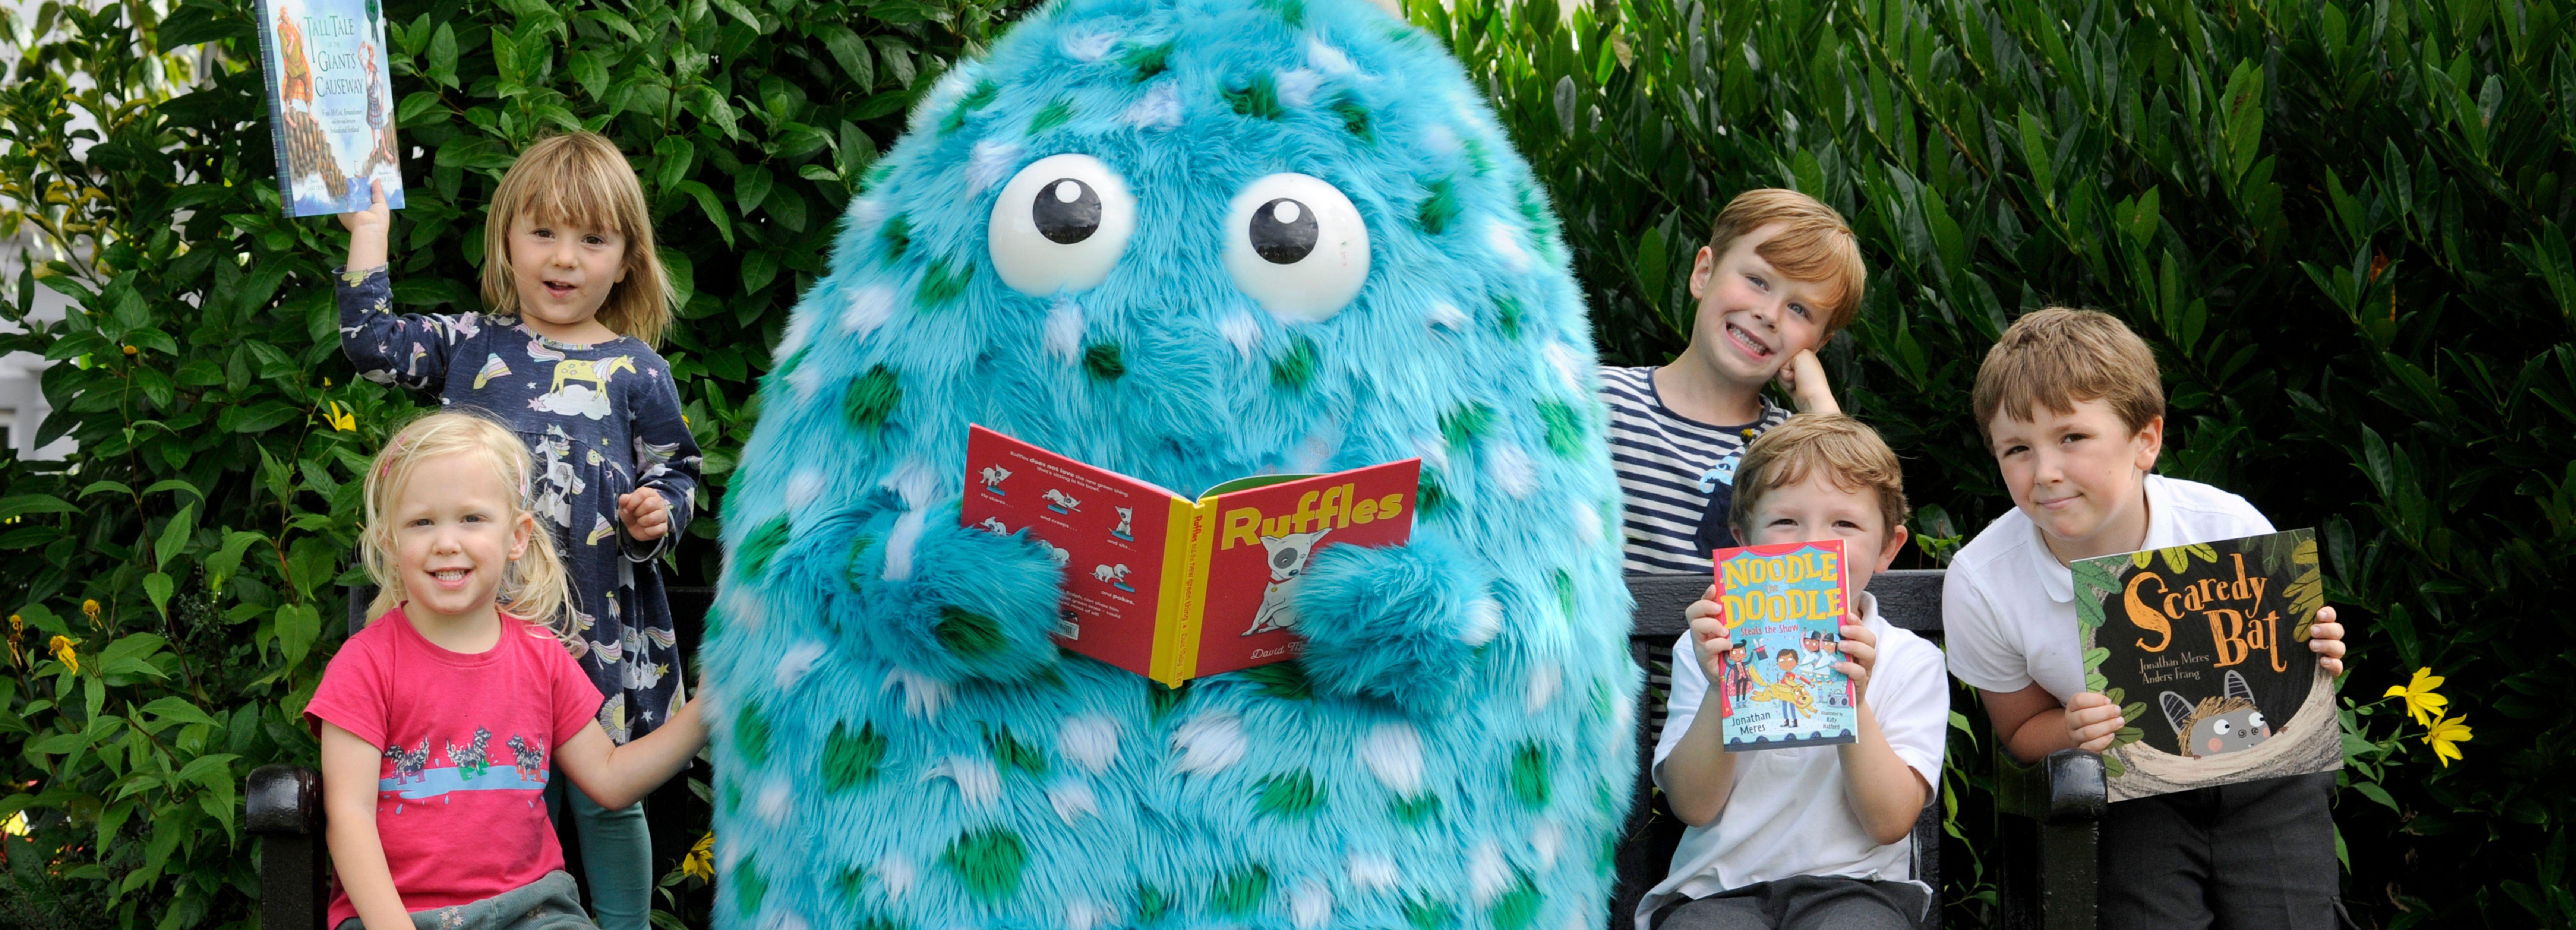 Bigwig, our children's book festival mascot, stands with various children in Wigtown gardens reading a book, The children are smiling and holding books up.